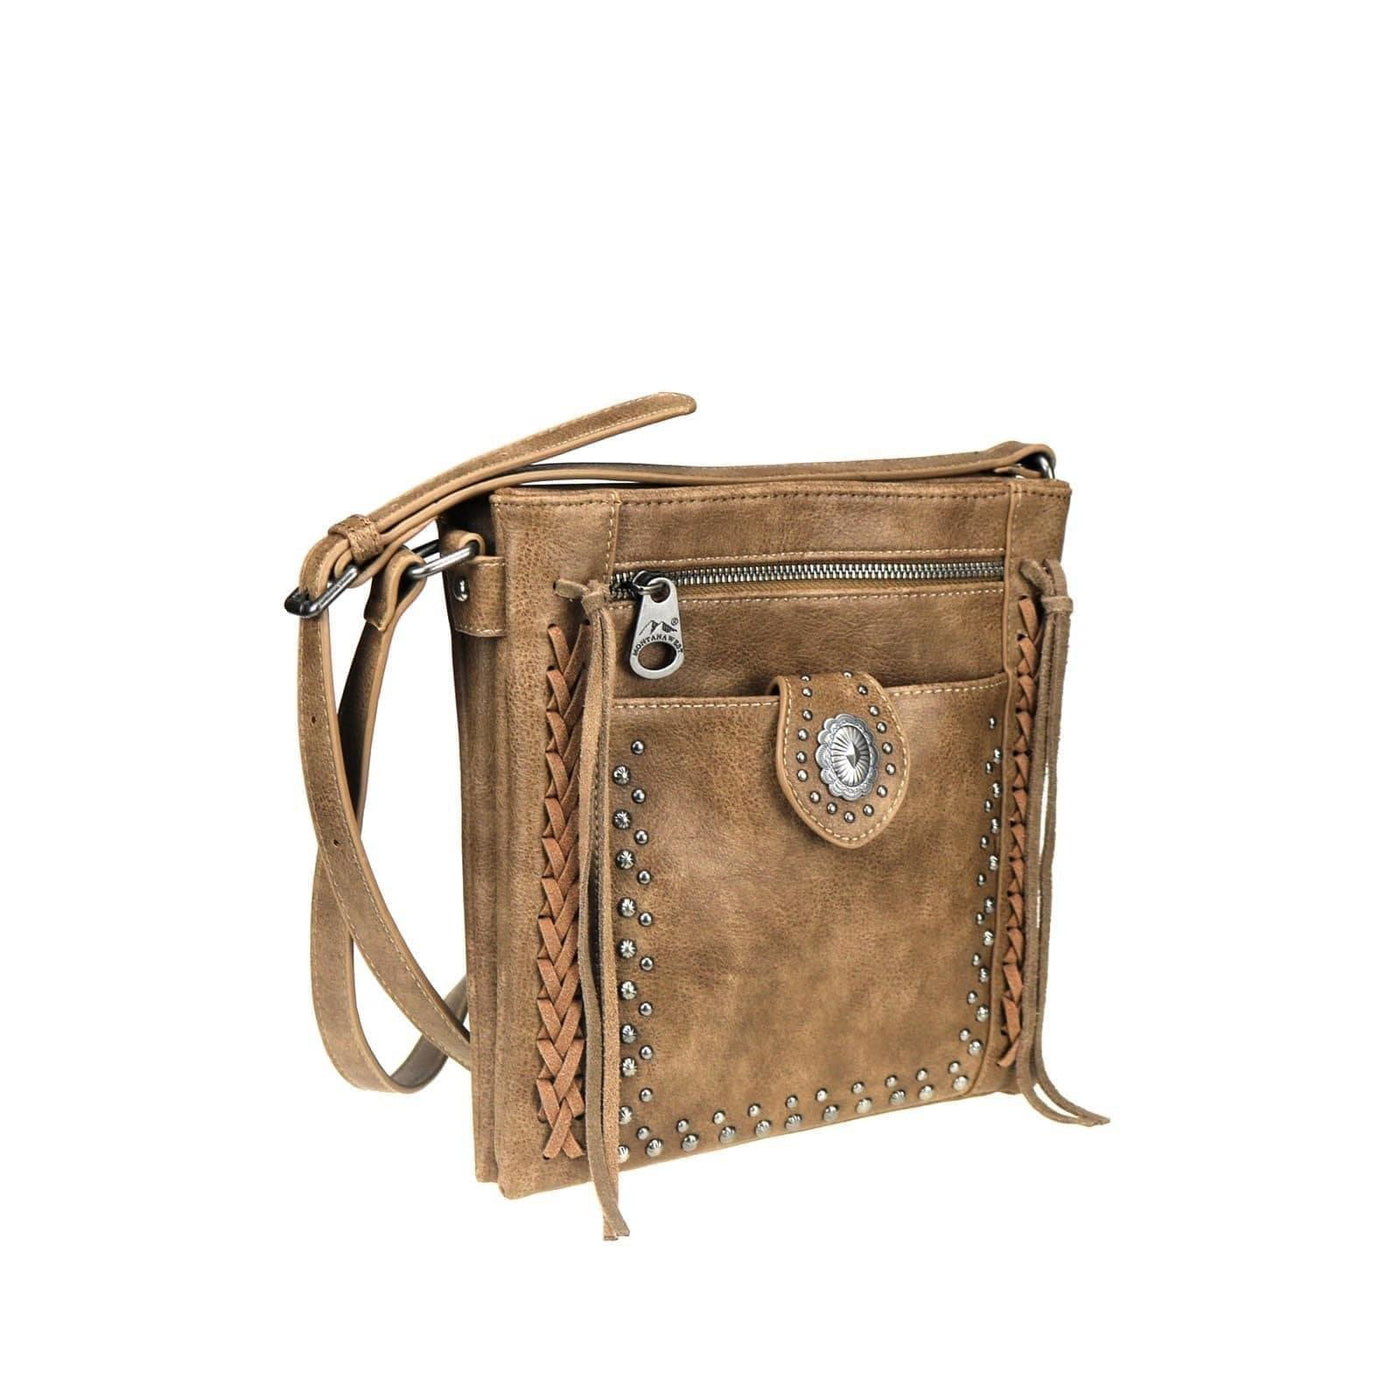 Concealed Carry Concho Crossbody Bag by Montana West